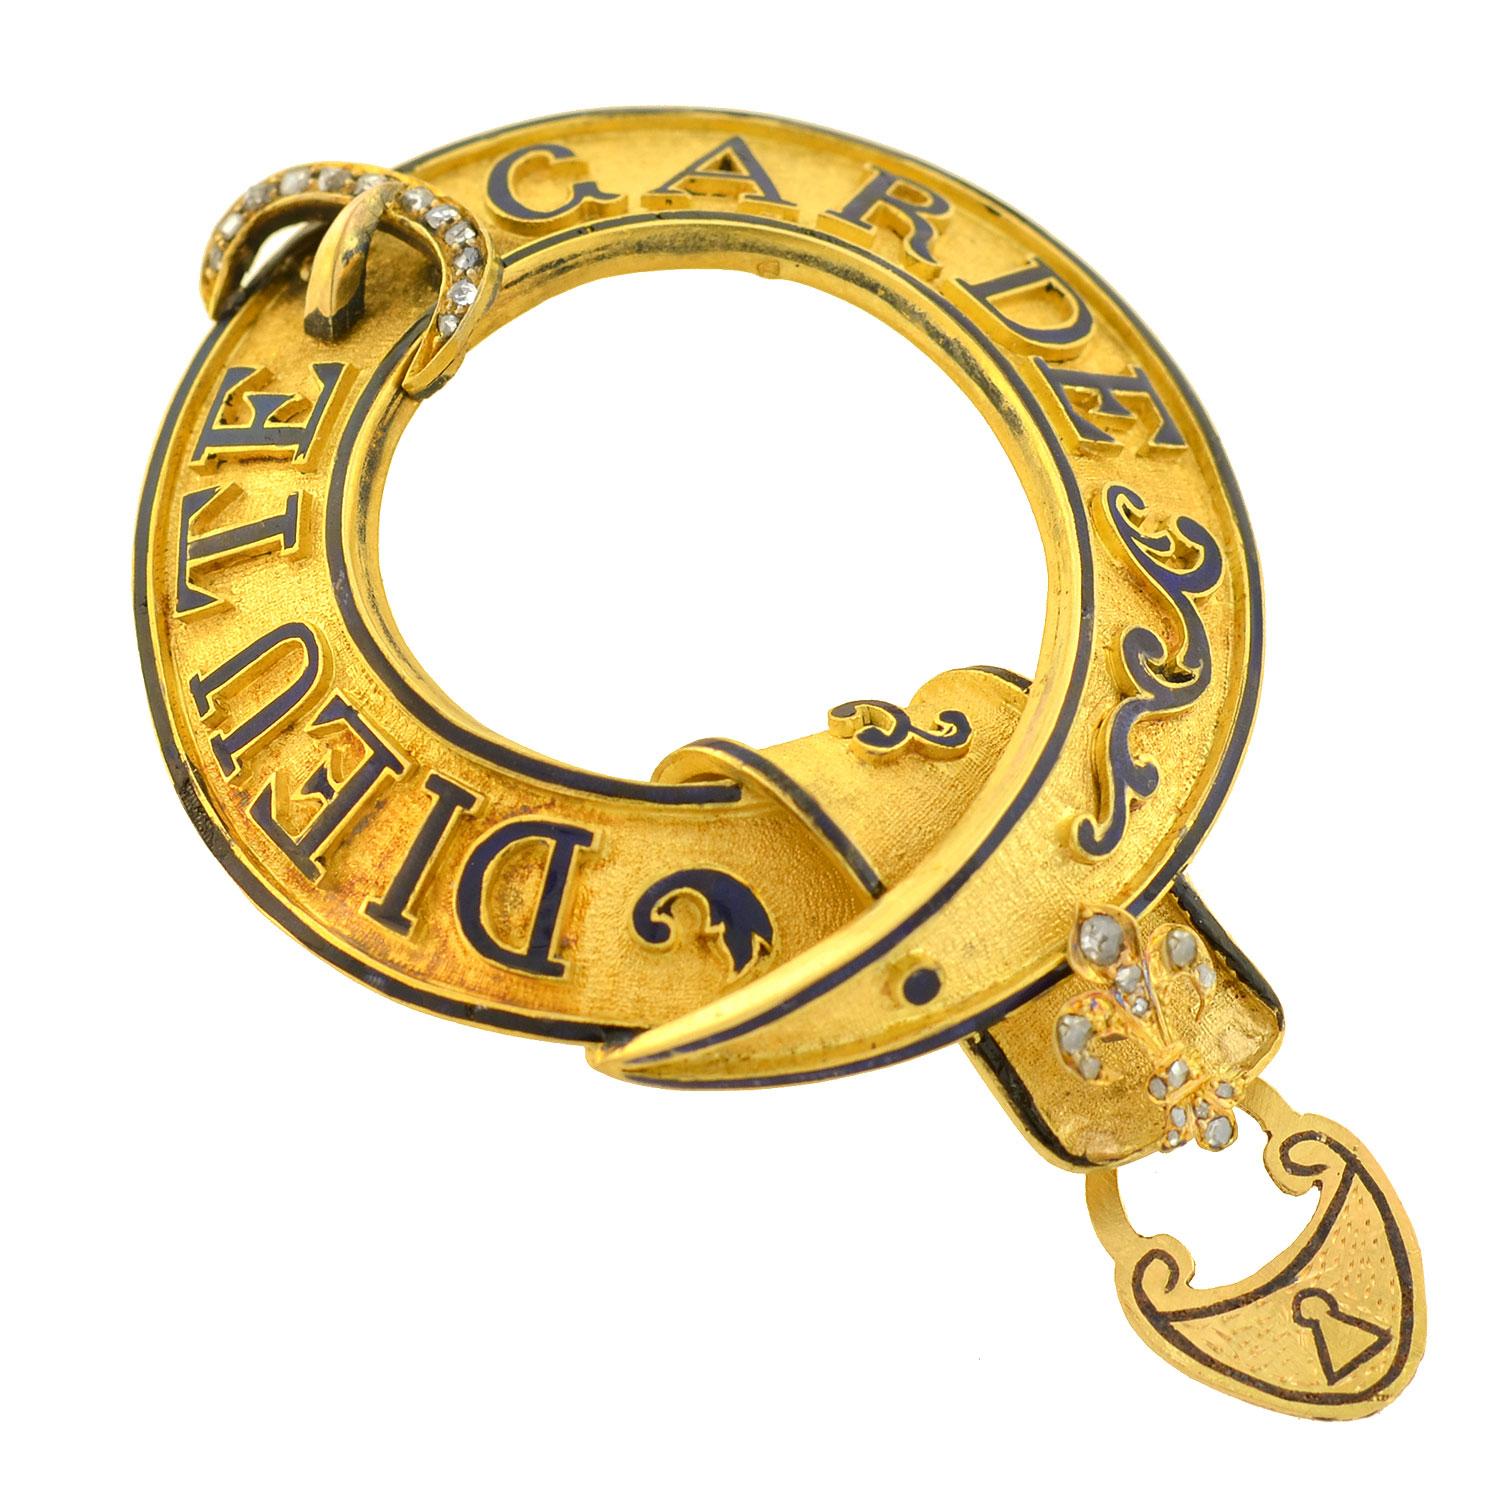 A stunning and unique pendant from the Victorian (ca1880) era! Crafted in rich 18kt yellow gold, this gorgeous piece, which is particularly large in size, forms a three-dimensional loop which is portrayed by the strap of a belt. Lining the surface